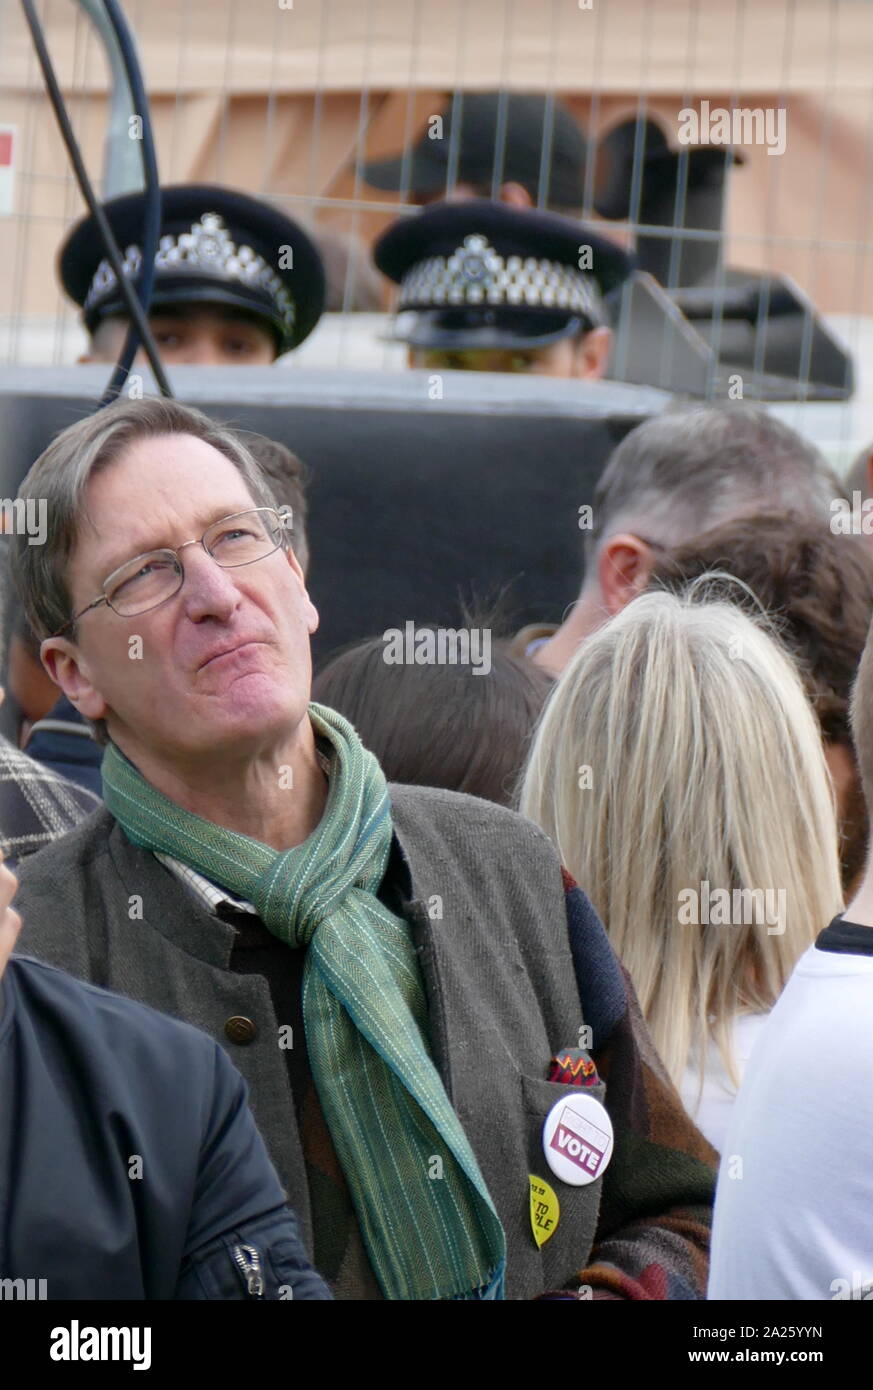 Dominic Grieve, British Conservative politician, at the 'People's Vote' march in Parliament Square, London. The People's Vote march took place in London on 23 March 2019 as part of a series of demonstrations to protest against Brexit, call for a new referendum, and ask the British Government to revoke Article 50. It brought to the capital hundreds of thousands of protestors, or over a million people according to the organizers. Stock Photo